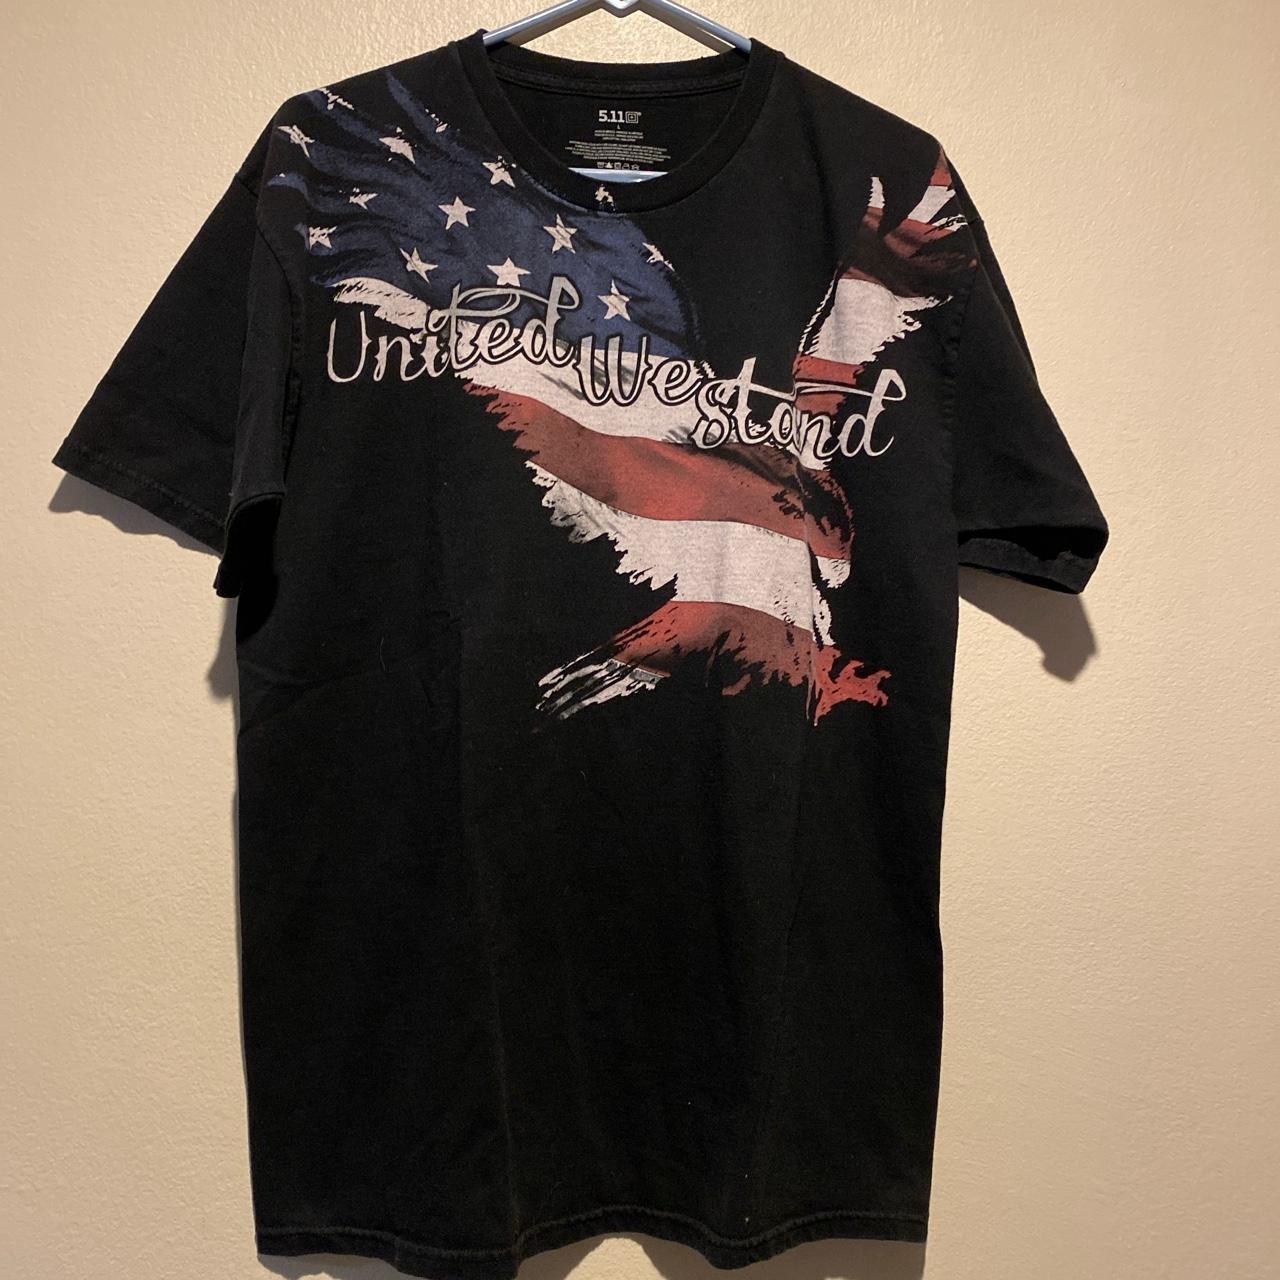 5.11 Tactical, United We stand shirt FREE SHIPPING!... - Depop